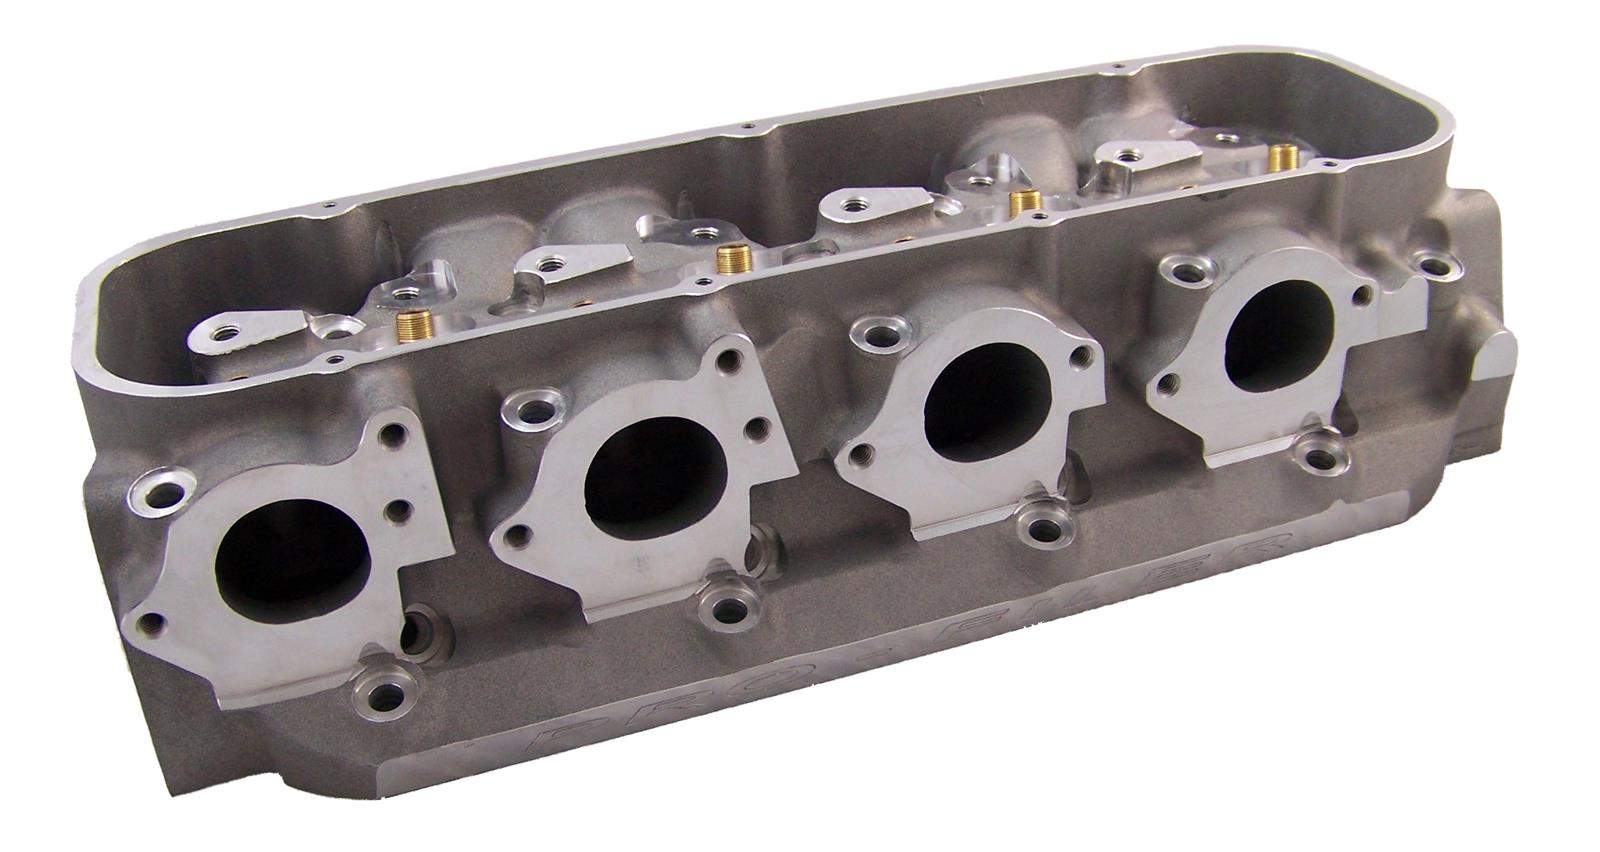 Profiler Performance Products 174-37-03 Pro-Filer Performance Products Big  Block Chevy Sniper Cylinder Heads